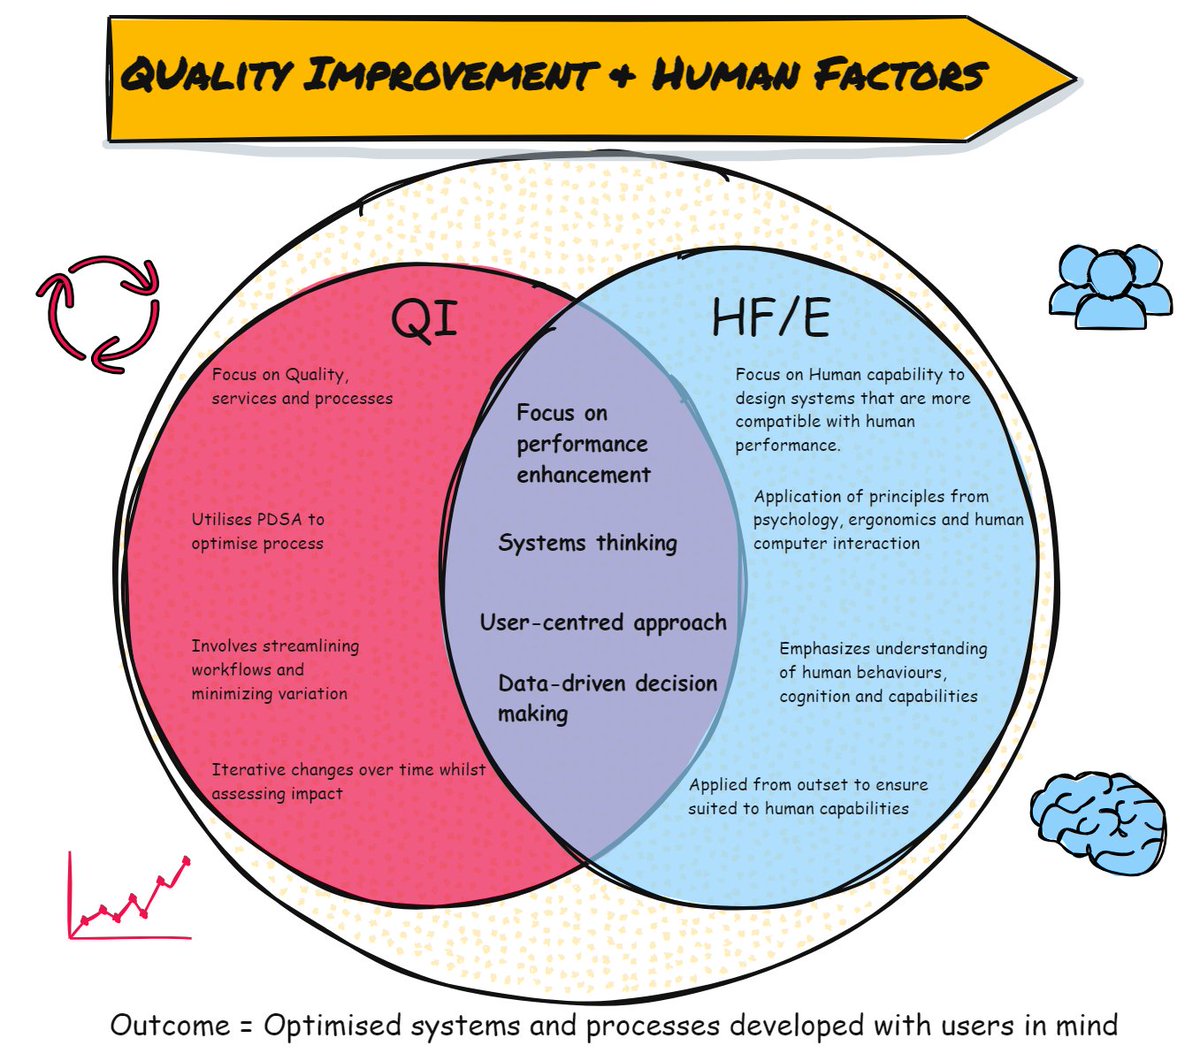 We often hear people talk about a 'Human factors approach' versus a 'QI approach' (and vigorously defended), but there is much overlap between these methods and can often be used together to drive performance gains #QualityImprovement #HumanFactors #Healthcare